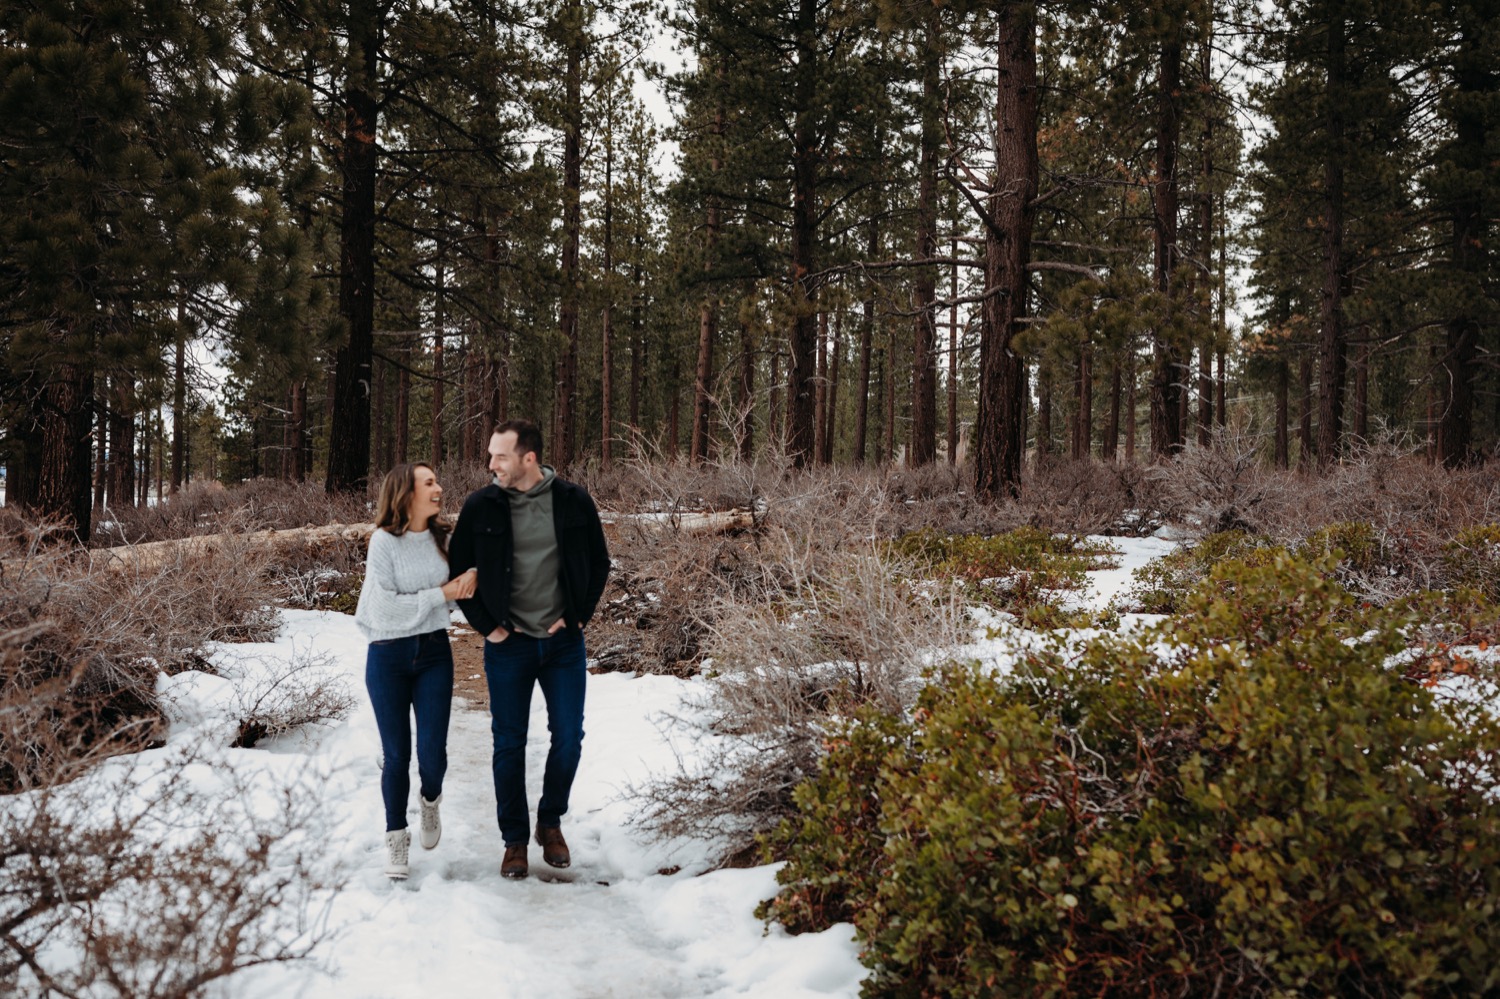 Zephyr-Cove-Winter-Engagement-Session. couple walking together in the trees with snow on the ground while looking at each other